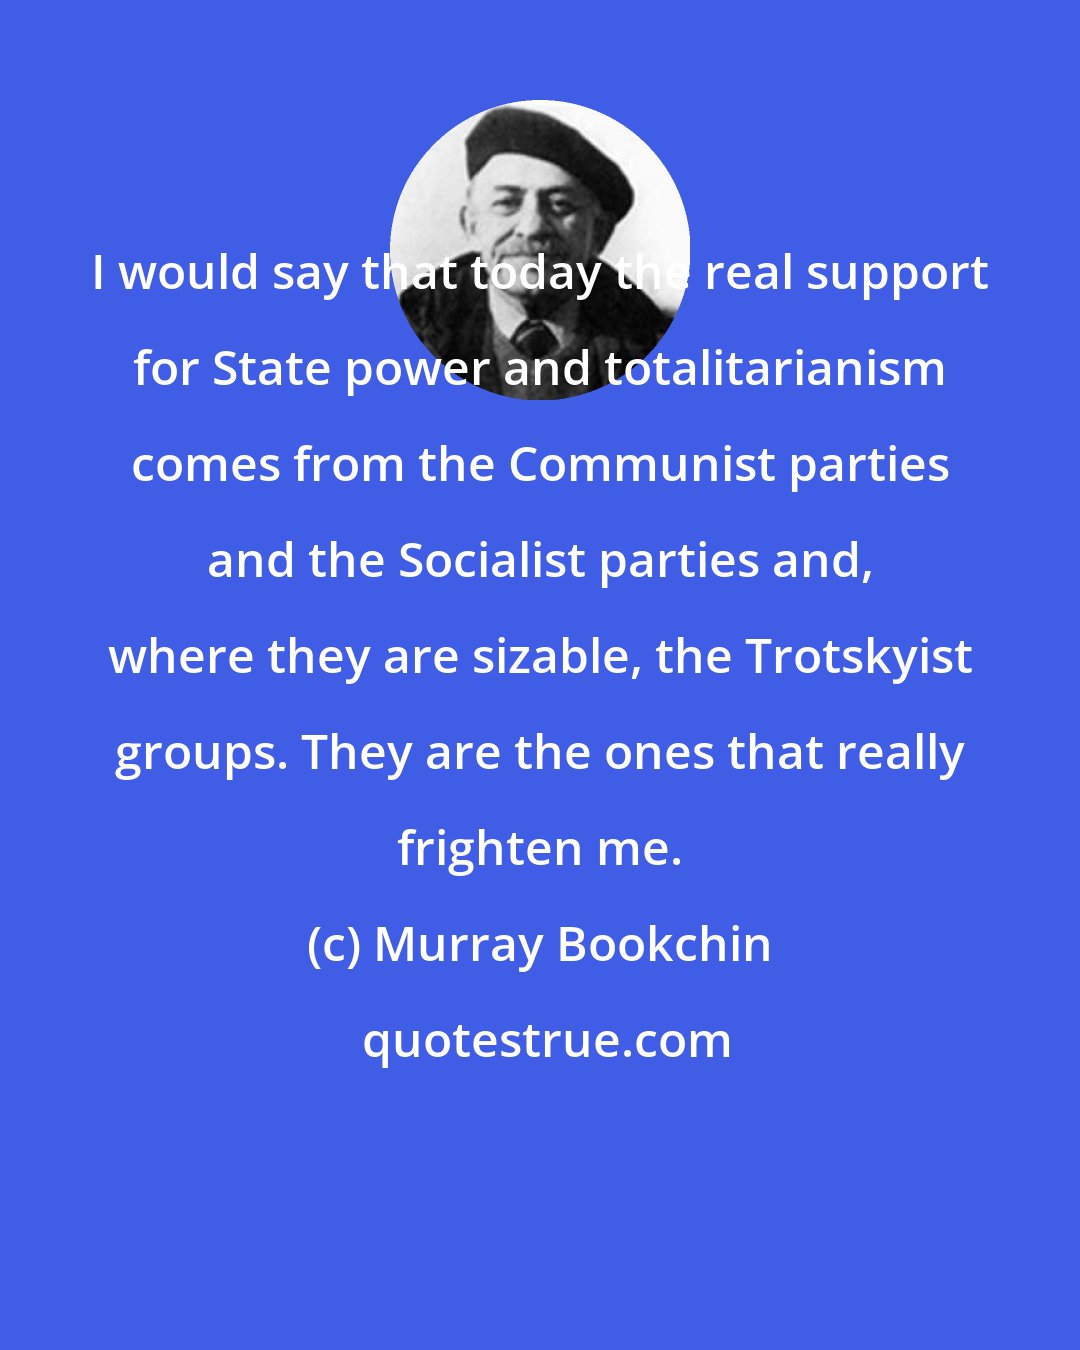 Murray Bookchin: I would say that today the real support for State power and totalitarianism comes from the Communist parties and the Socialist parties and, where they are sizable, the Trotskyist groups. They are the ones that really frighten me.